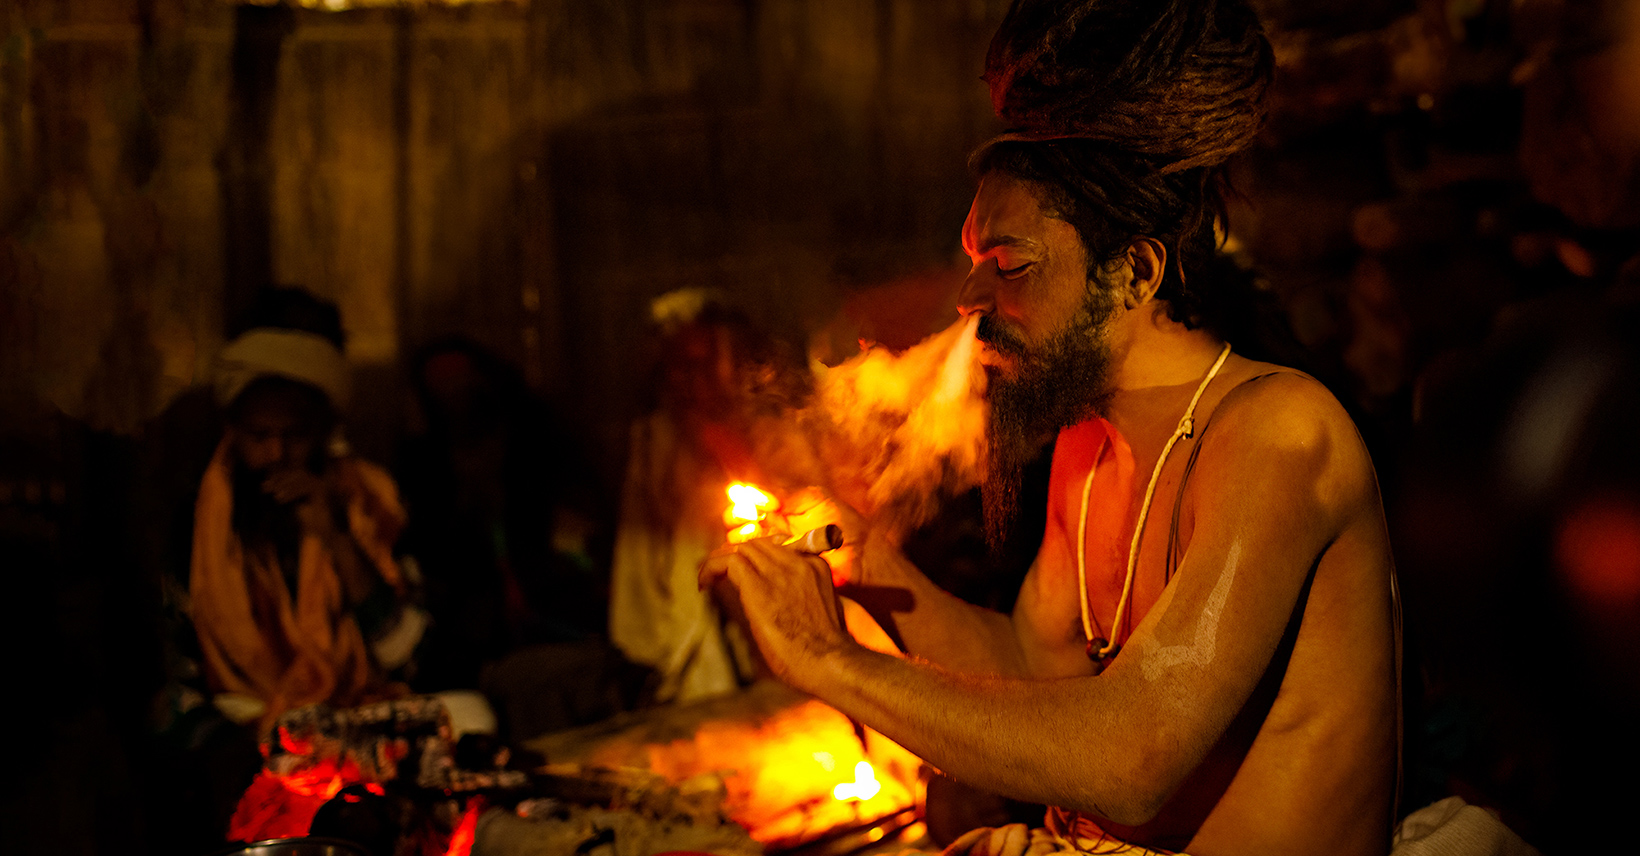 A Naga Sadhu smokes a chillum at the Kumbh Mela in Allahabad, India. I am fortunate enough to be connected with so many Naga Babas. I have made this image during Allahabad Kumbh Mela 2019. Naga Sadhus are found all over the country but they are exclusively from the Himalayas. Deep in the mountains of the Himalayas, these sadhus live in subzero temperatures, wearing nothing more than a single piece of cloth and taking very minimum food. As they are in the search of enlightenment, they have very strict rules to be followed as they need to conserve energy for their concentration and meditation. They consume a certain amount of ‘charas’ or ‘hash’, which exclusively grows only in the Himalayan mountains. This specific kind of ‘charas’, when consumed produces an immense amount of heat in the body, so it helps them to cope up with the extreme cold temperatures in the mountains. Kumbh Mela, the largest spiritual gathering of mankind on the Earth, is held every 12 years on the banks of the 'Sangam'- the confluence of the holy rivers Ganga, Yamuna and the mythical Saraswati. Millions of devotees take a holy dip in the sacred water during the mela. Maha Kumbha Mela held only at Prayag, once in every 144 years. It is believed that at the historic moment of the Maha Kumbh Mela, the river turns itself into sanctity spots filled with ‘Amrita’ (Panacia or elixir of immortality). The pilgrims get once in a lifetime chance to bathe in the spirit of holiness, auspiciousness and salvation.